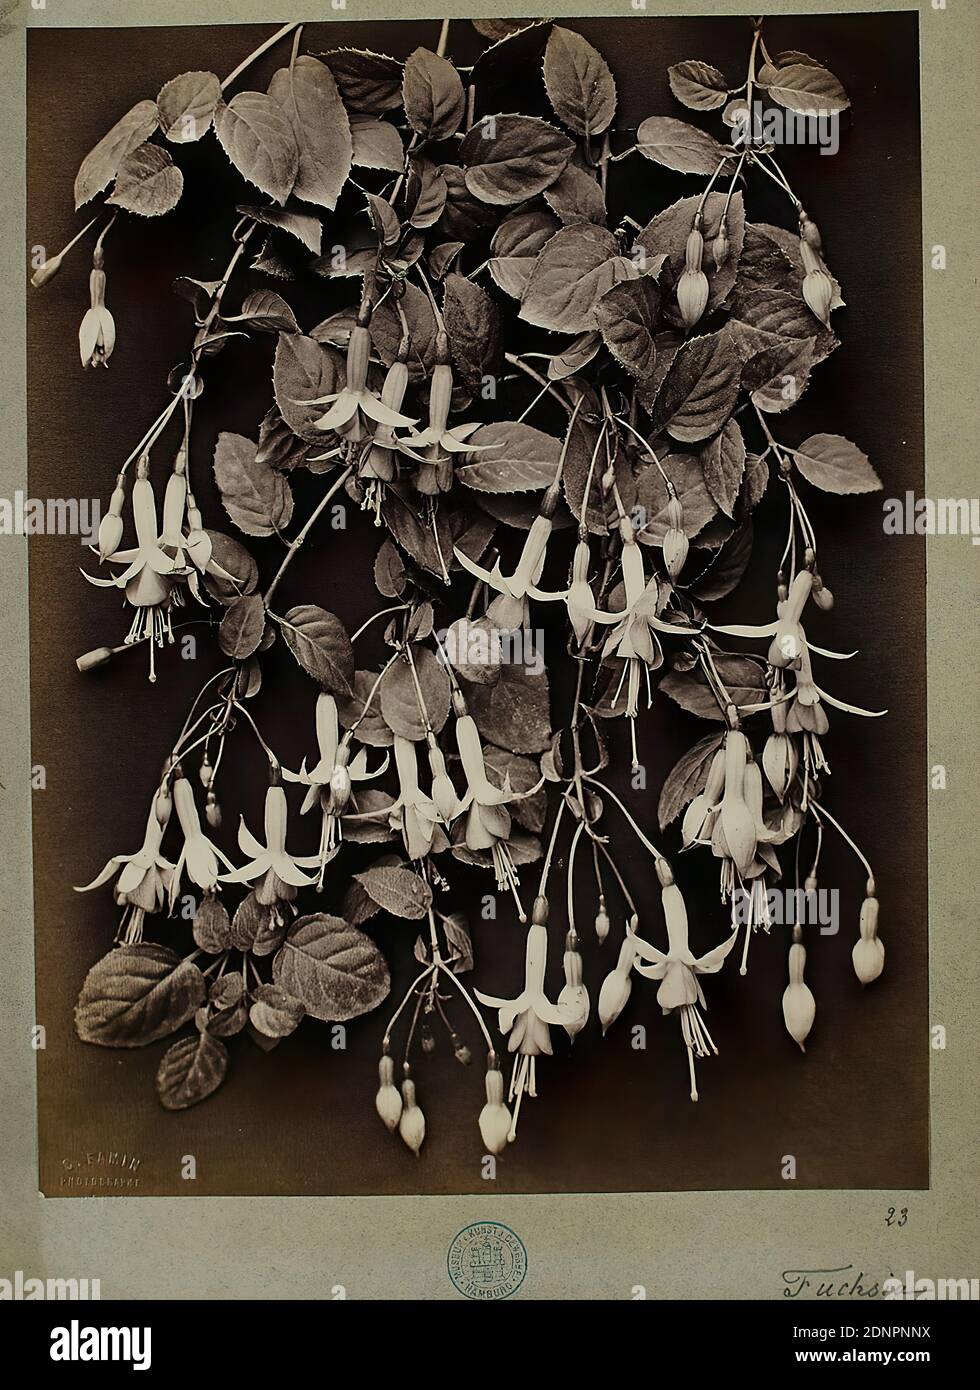 Constant Alexandre Famin, Fuchsia, albumin paper, black and white positive process, image size: height: 30.10 cm; width: 22.90 cm, dry stamp: recto u. li.: C. Famin, Photographe, Paris, inscribed: recto u. re.: in lead: 23, Fuchsia, nature photography, flowers Stock Photo